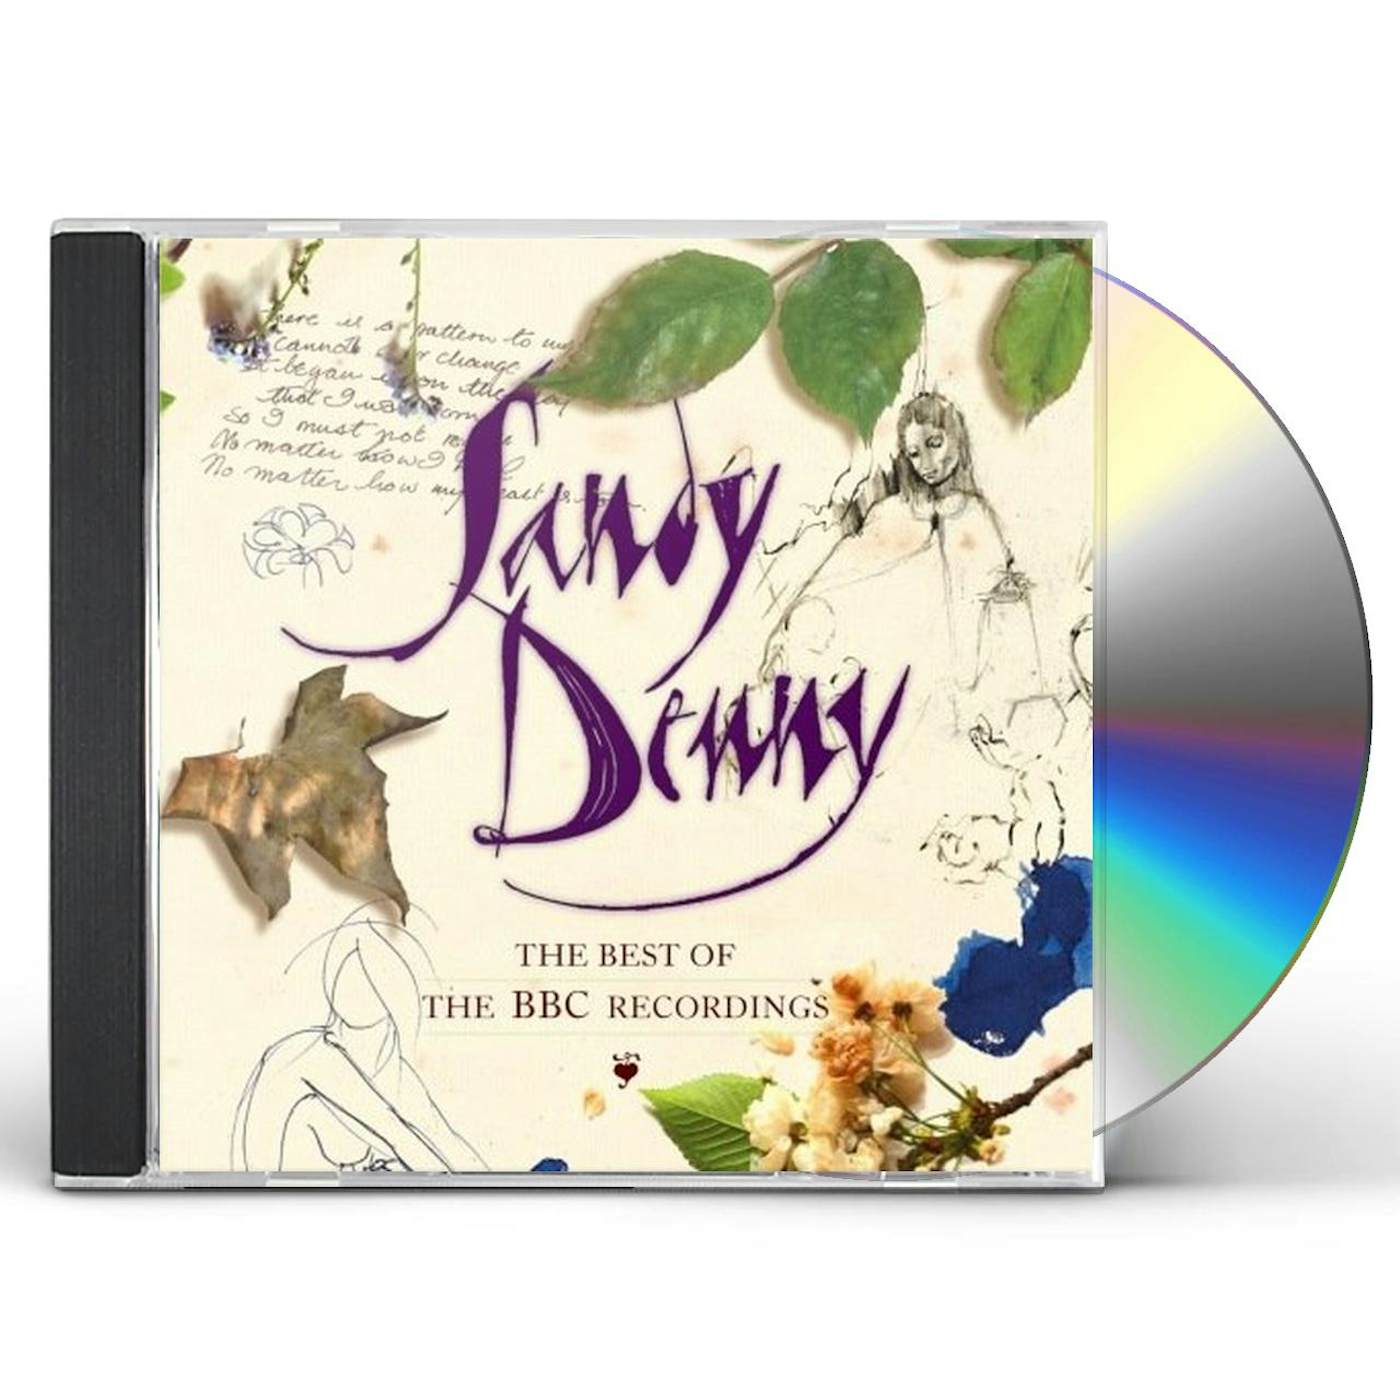 Sandy Denny BEST OF THE BBC RECORDINGS CD